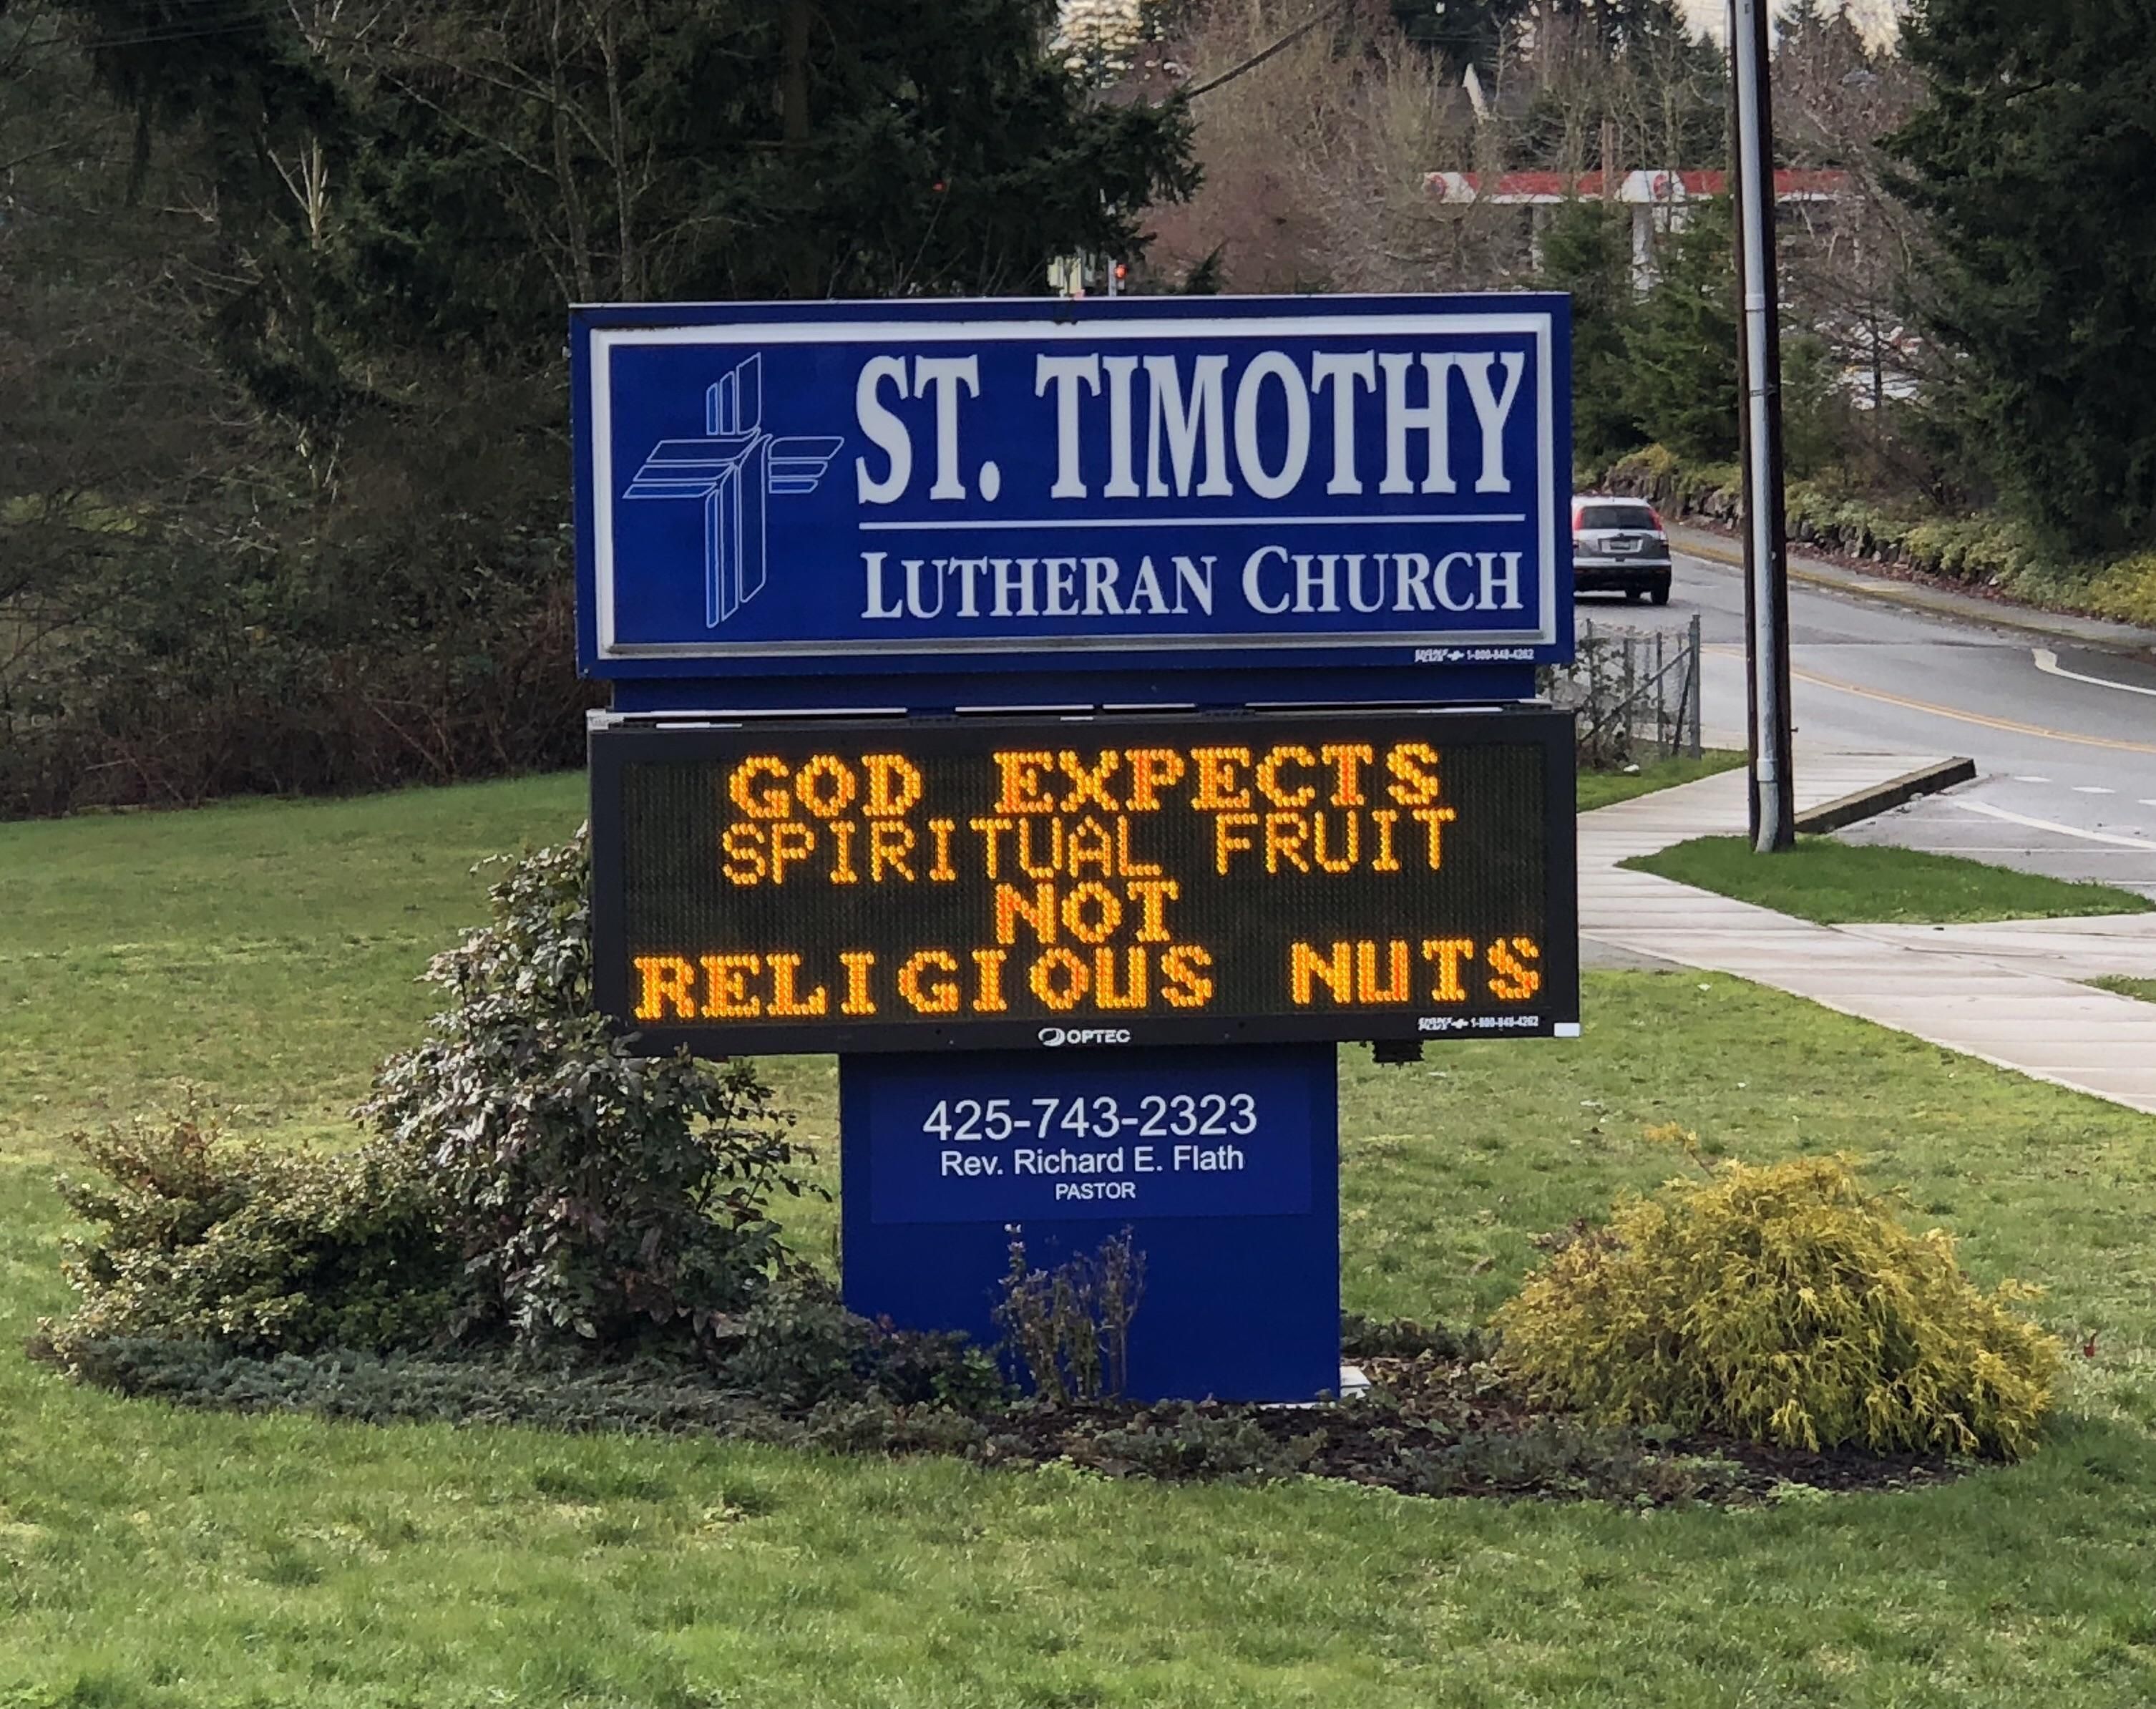 Local church keeping it real